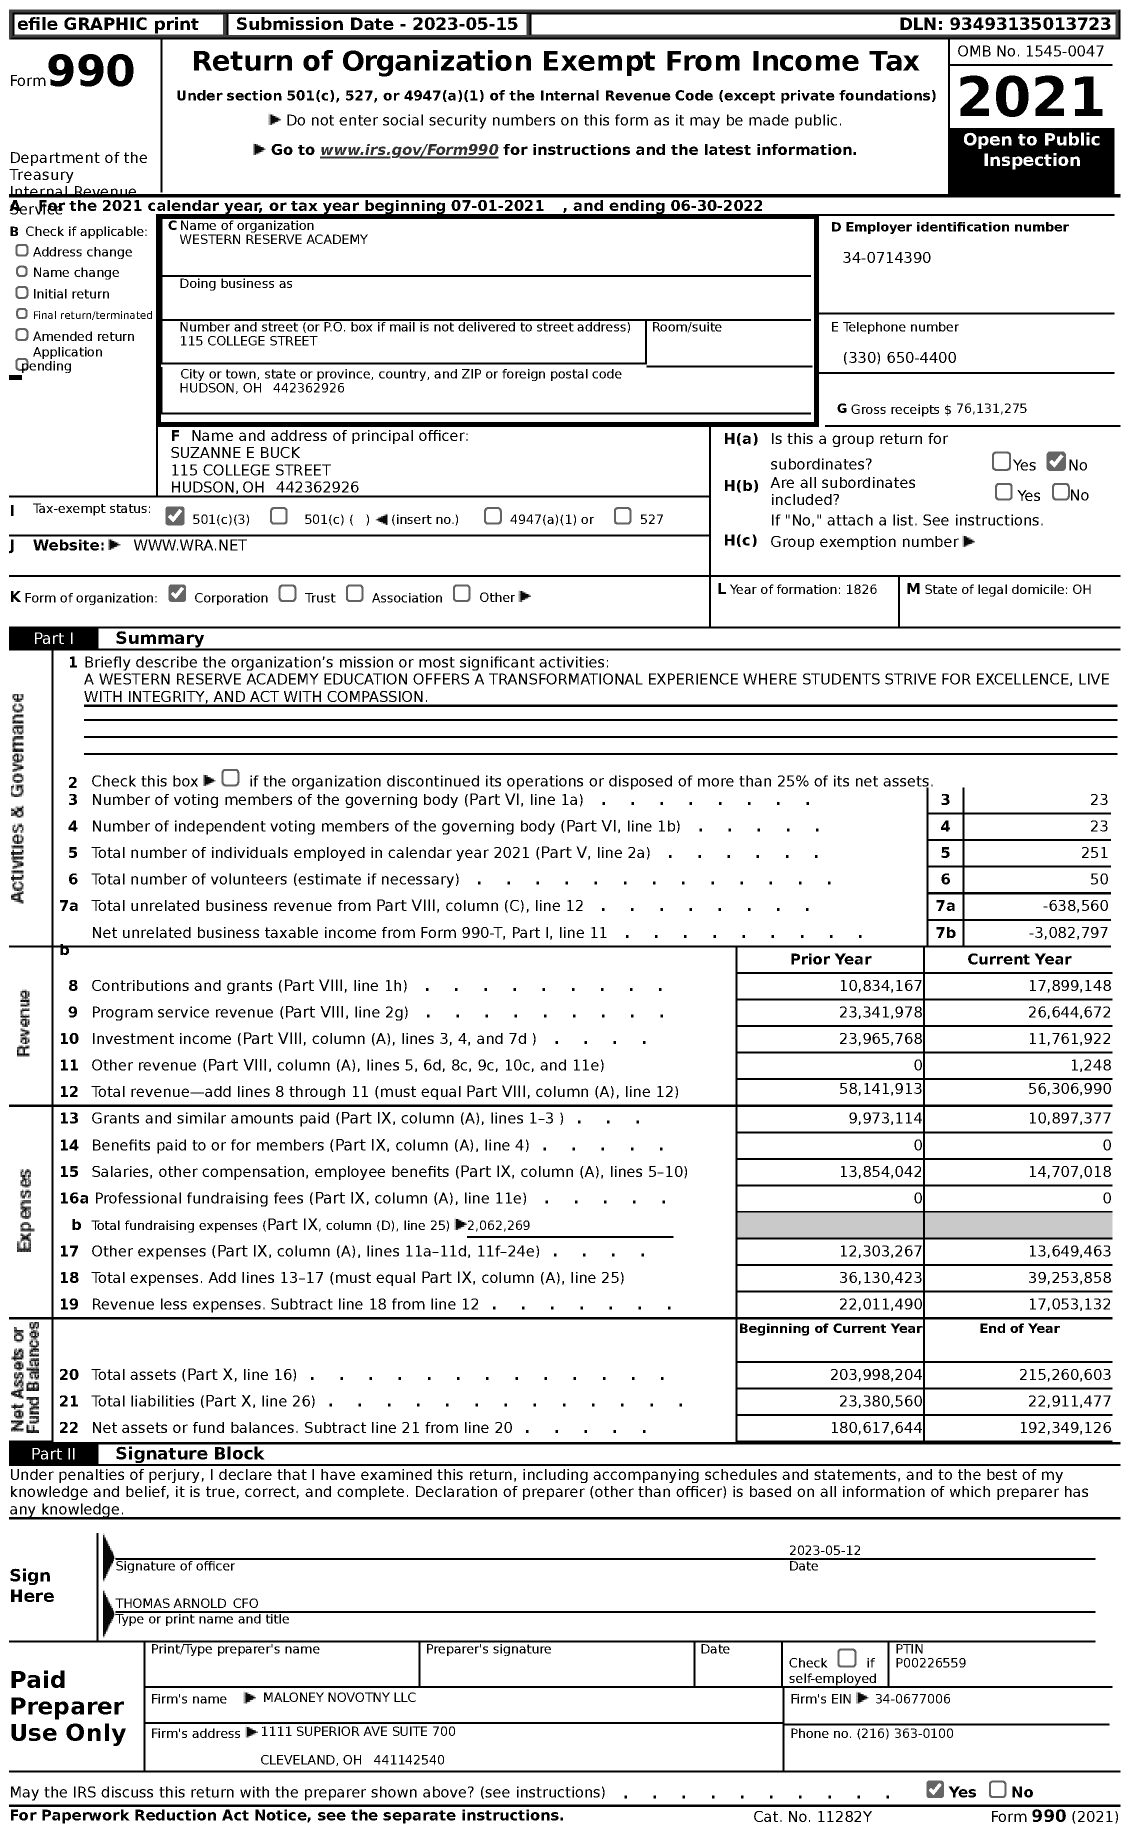 Image of first page of 2021 Form 990 for Western Reserve Academy (WRA)